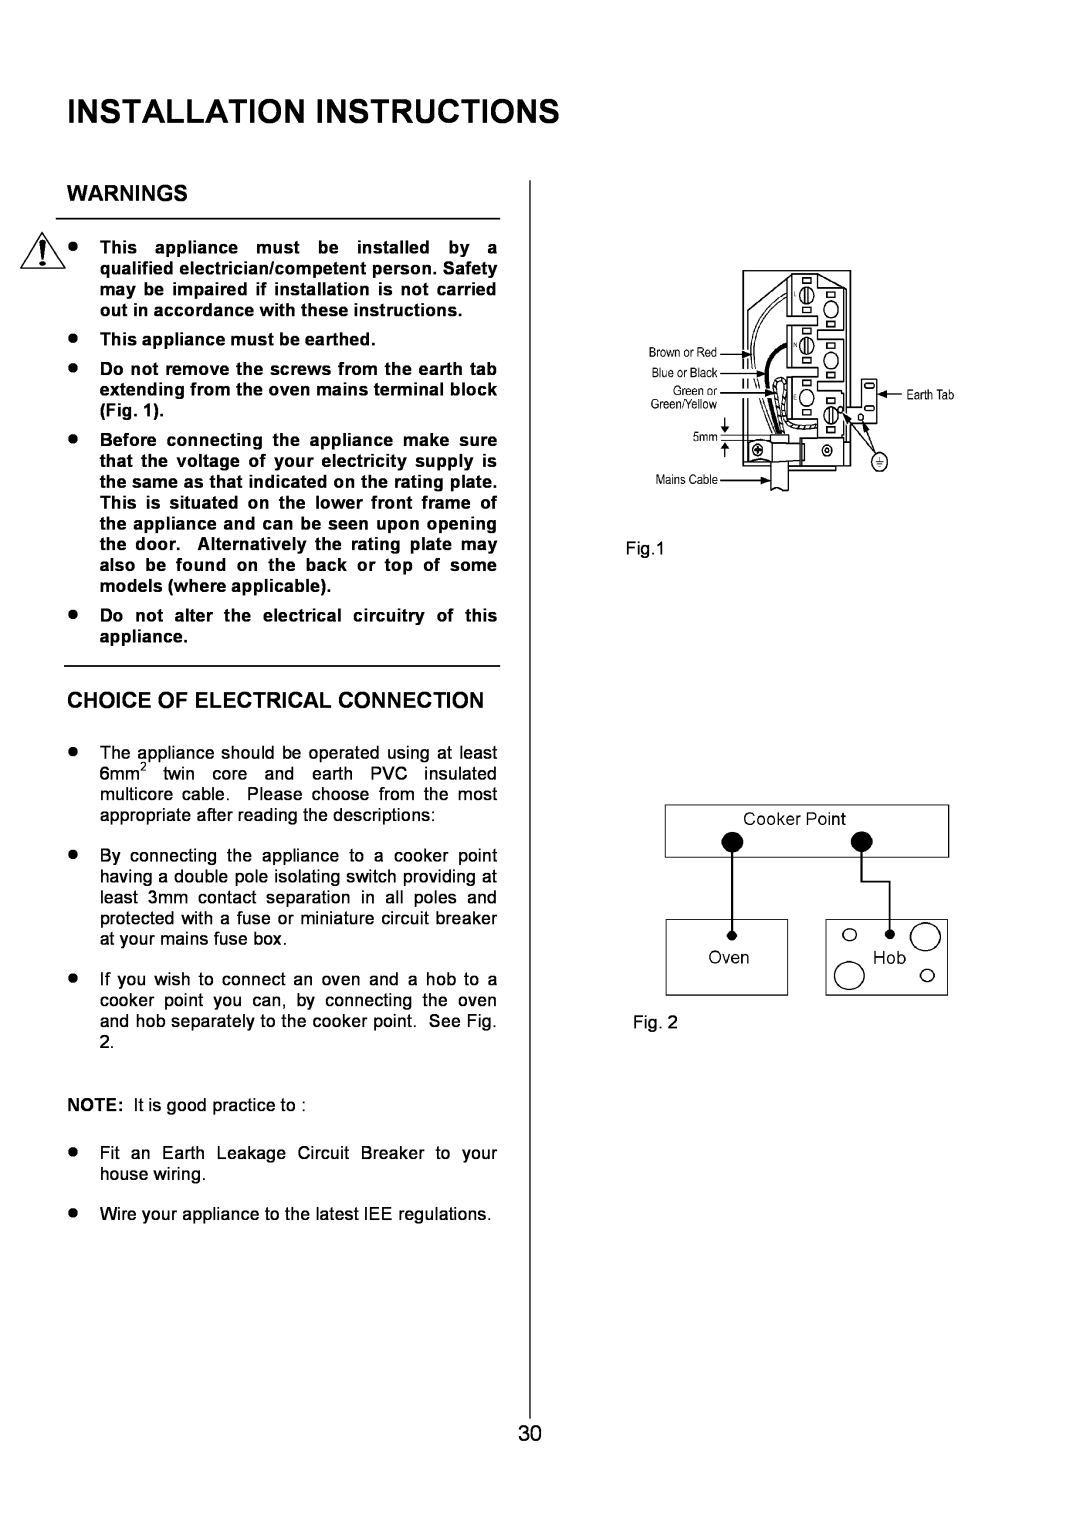 Zanussi ZOU 330 manual Installation Instructions, Warnings, Choice Of Electrical Connection, This appliance must be earthed 